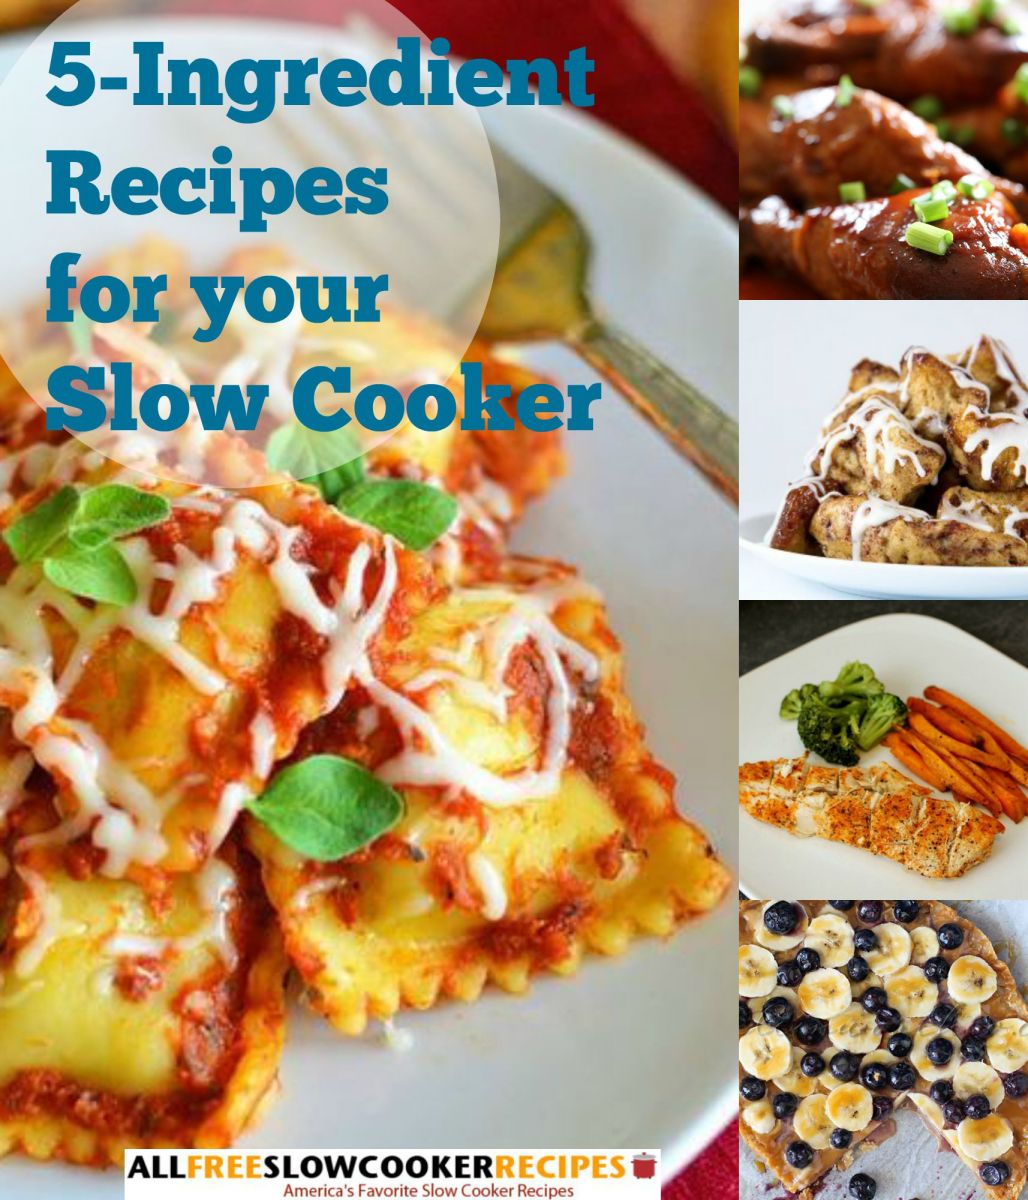 5 Ingredient Recipes for your Slow Cooker